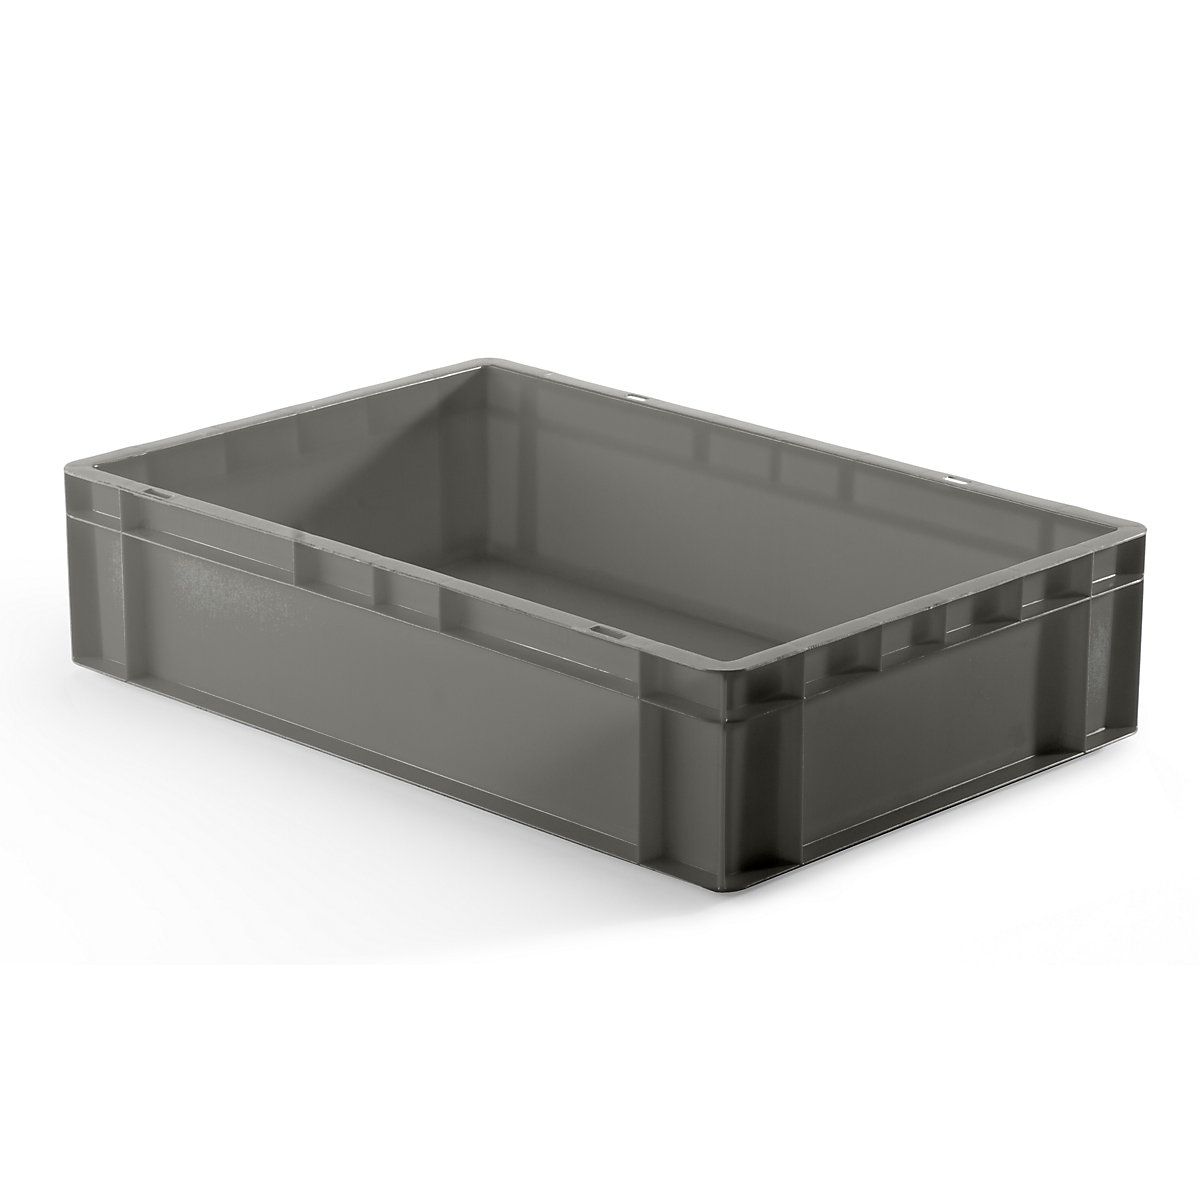 Euro stacking container, closed walls and base, LxWxH 600 x 400 x 145 mm, grey, pack of 5